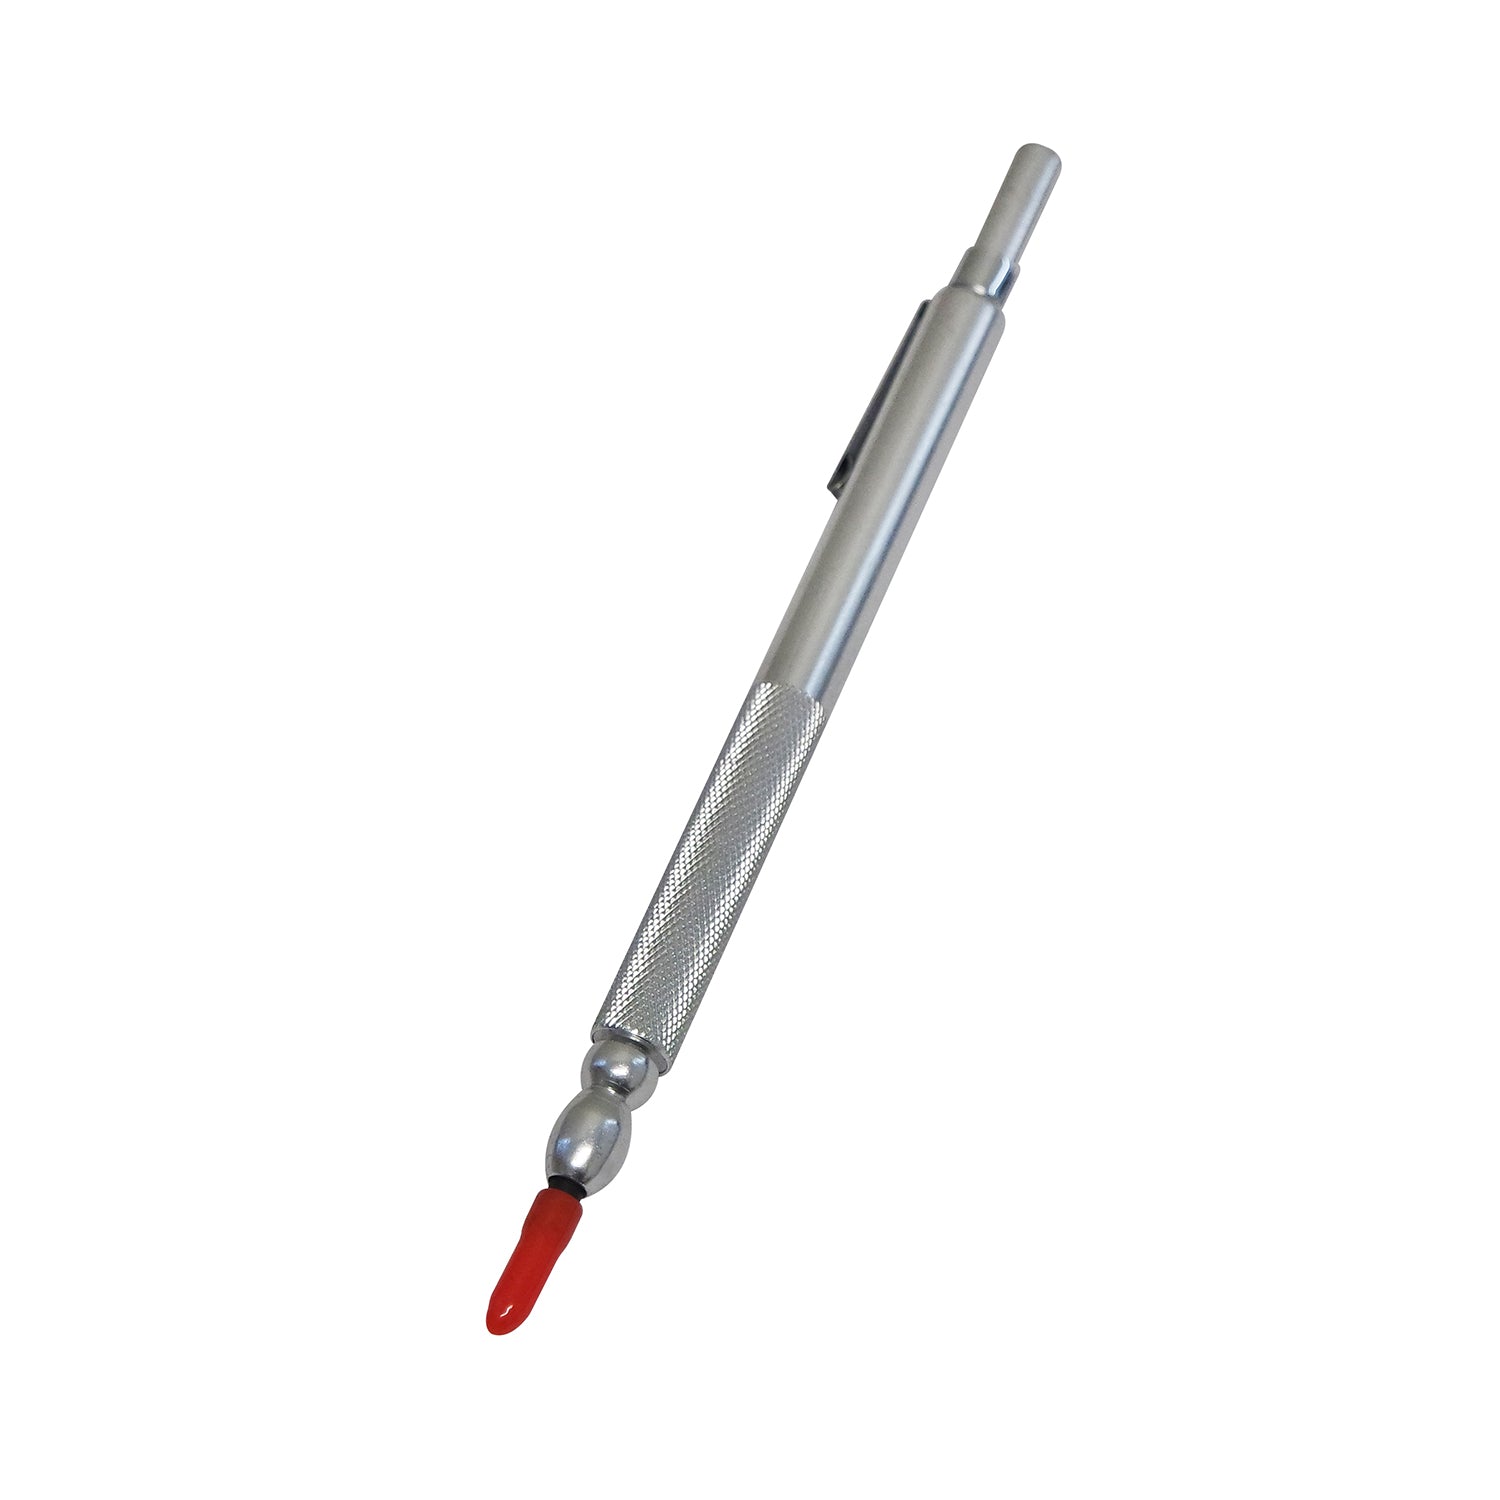 Giant Scribe, Carbide Tipped -Marking Supplies- eGPS Solutions Inc.